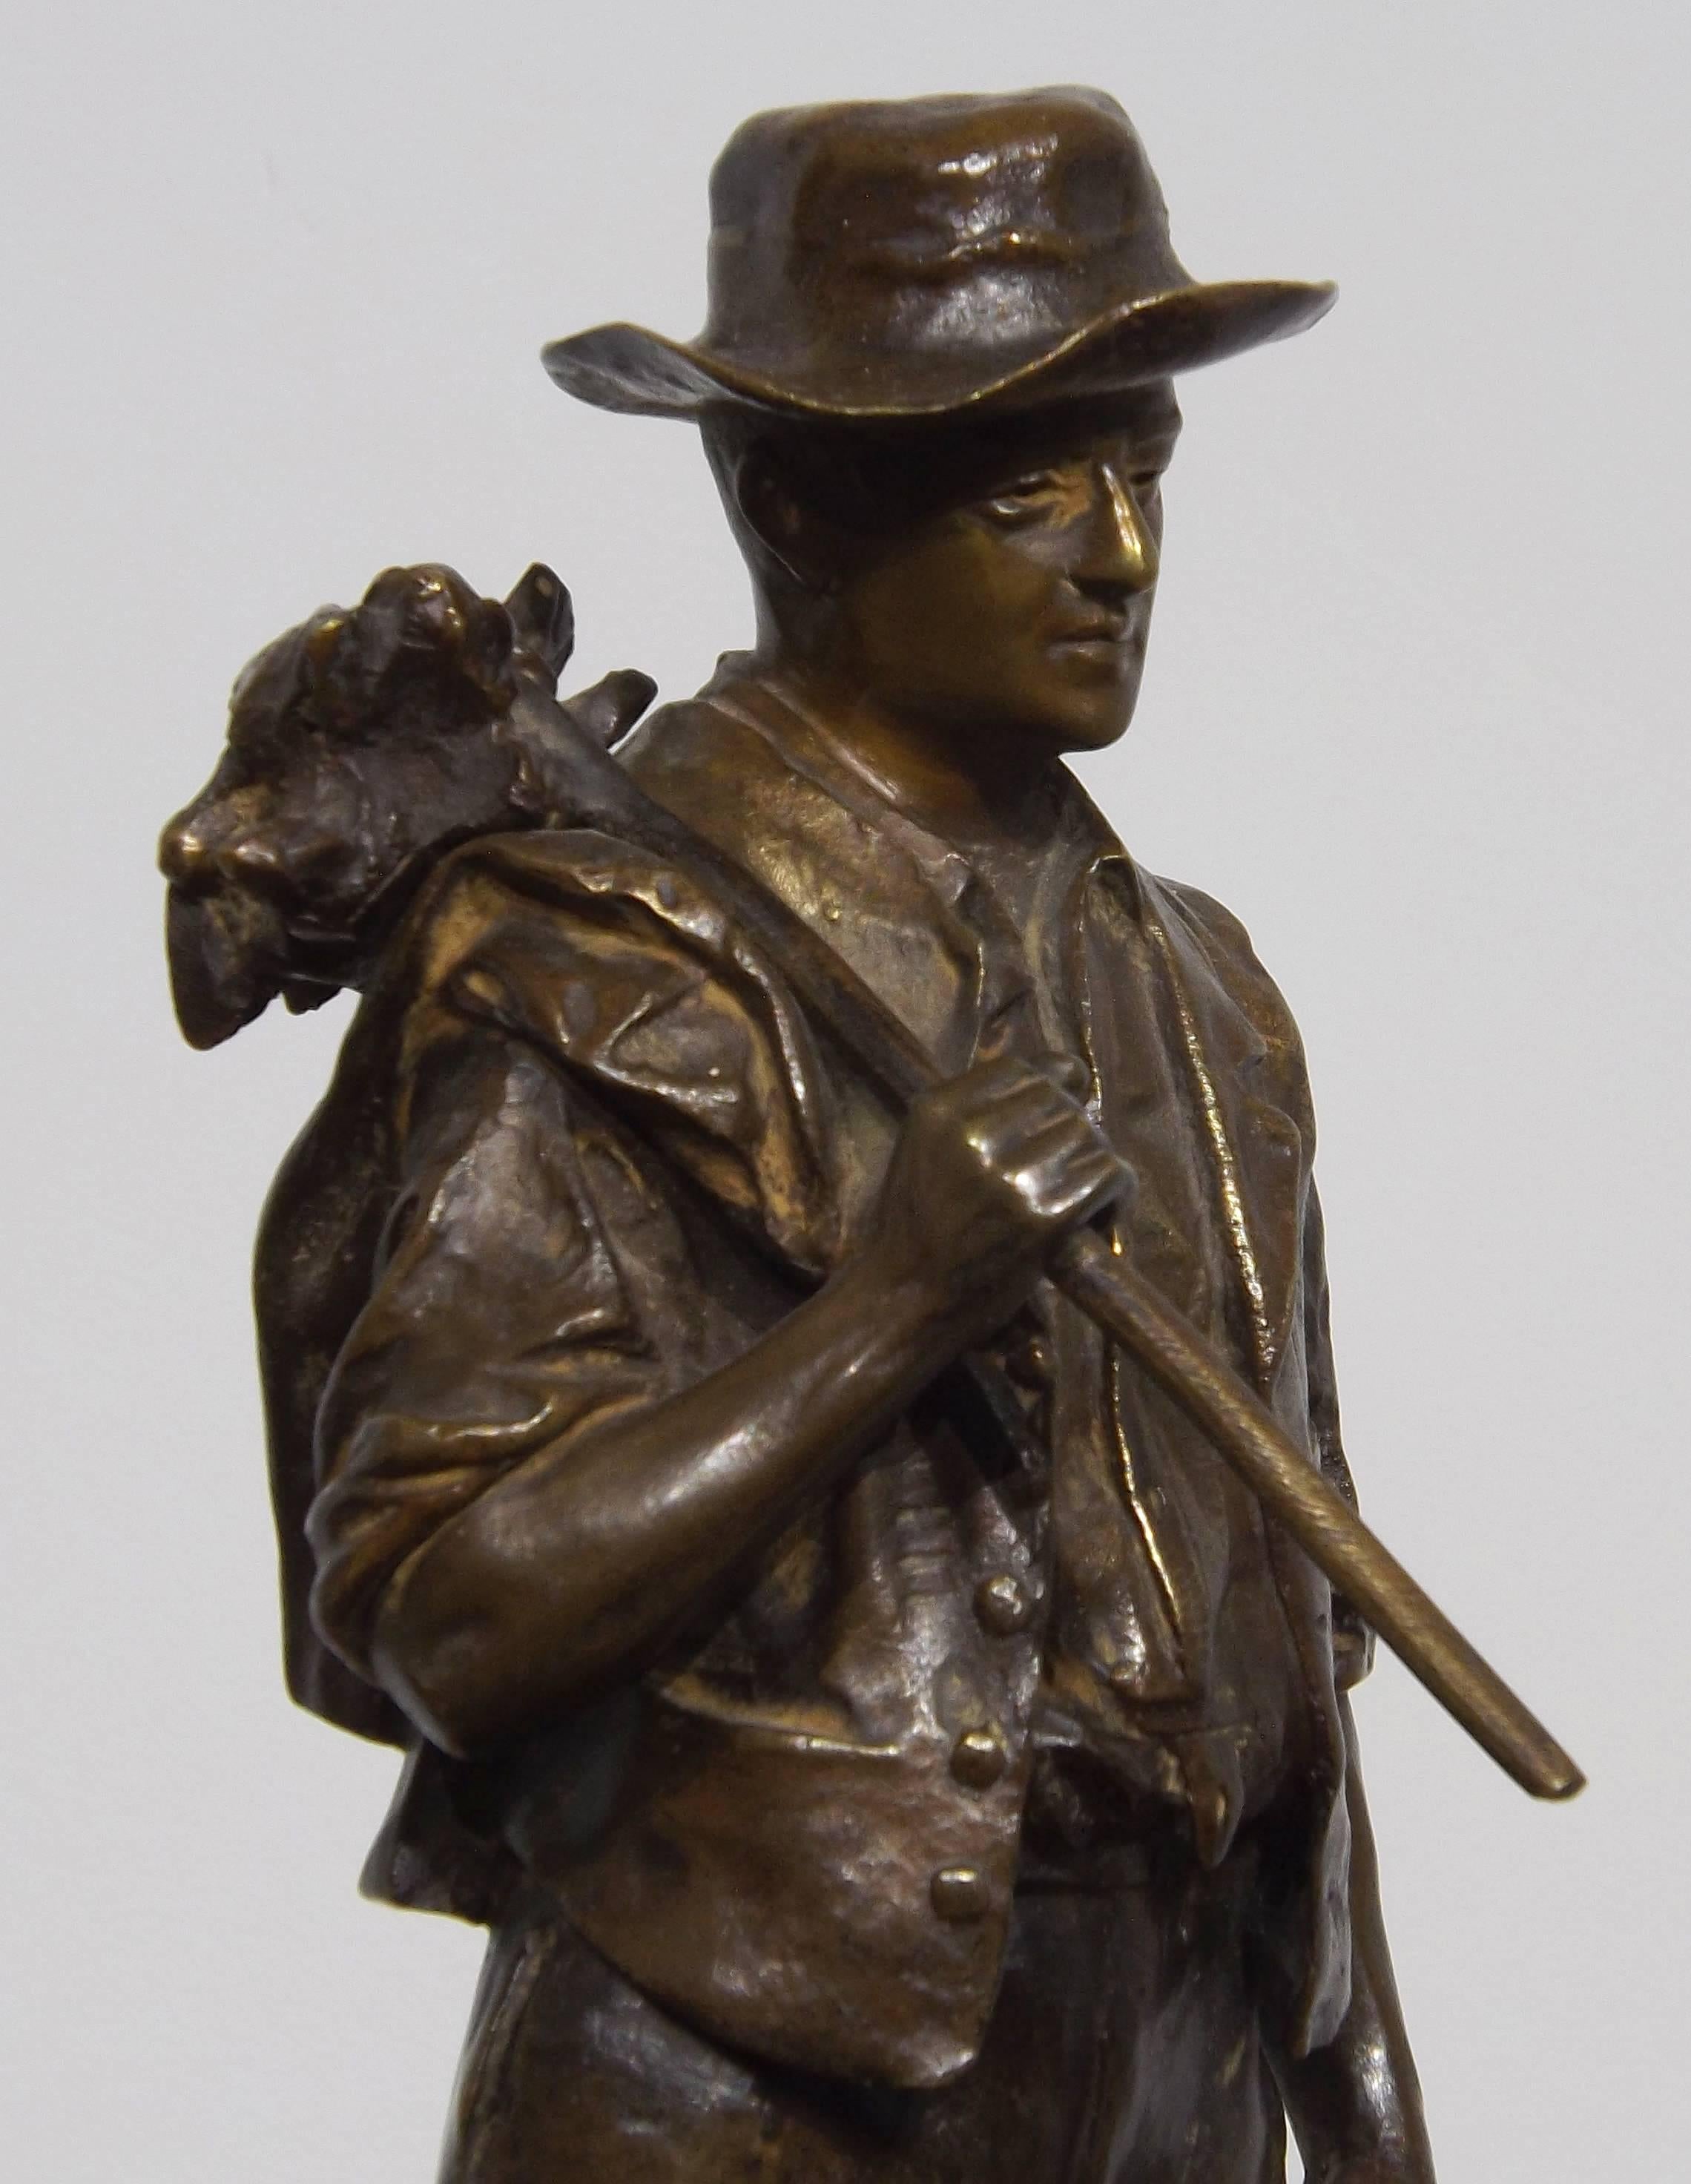 A nice example of a early period cast bronze of a farmer off to work by French sculptor Jean Garnier.

Garnier was born in Mouzeuil in 1853, and was active in Paris and Montfermeil until his death in 1910. Exhibited at the Salon des Artiste